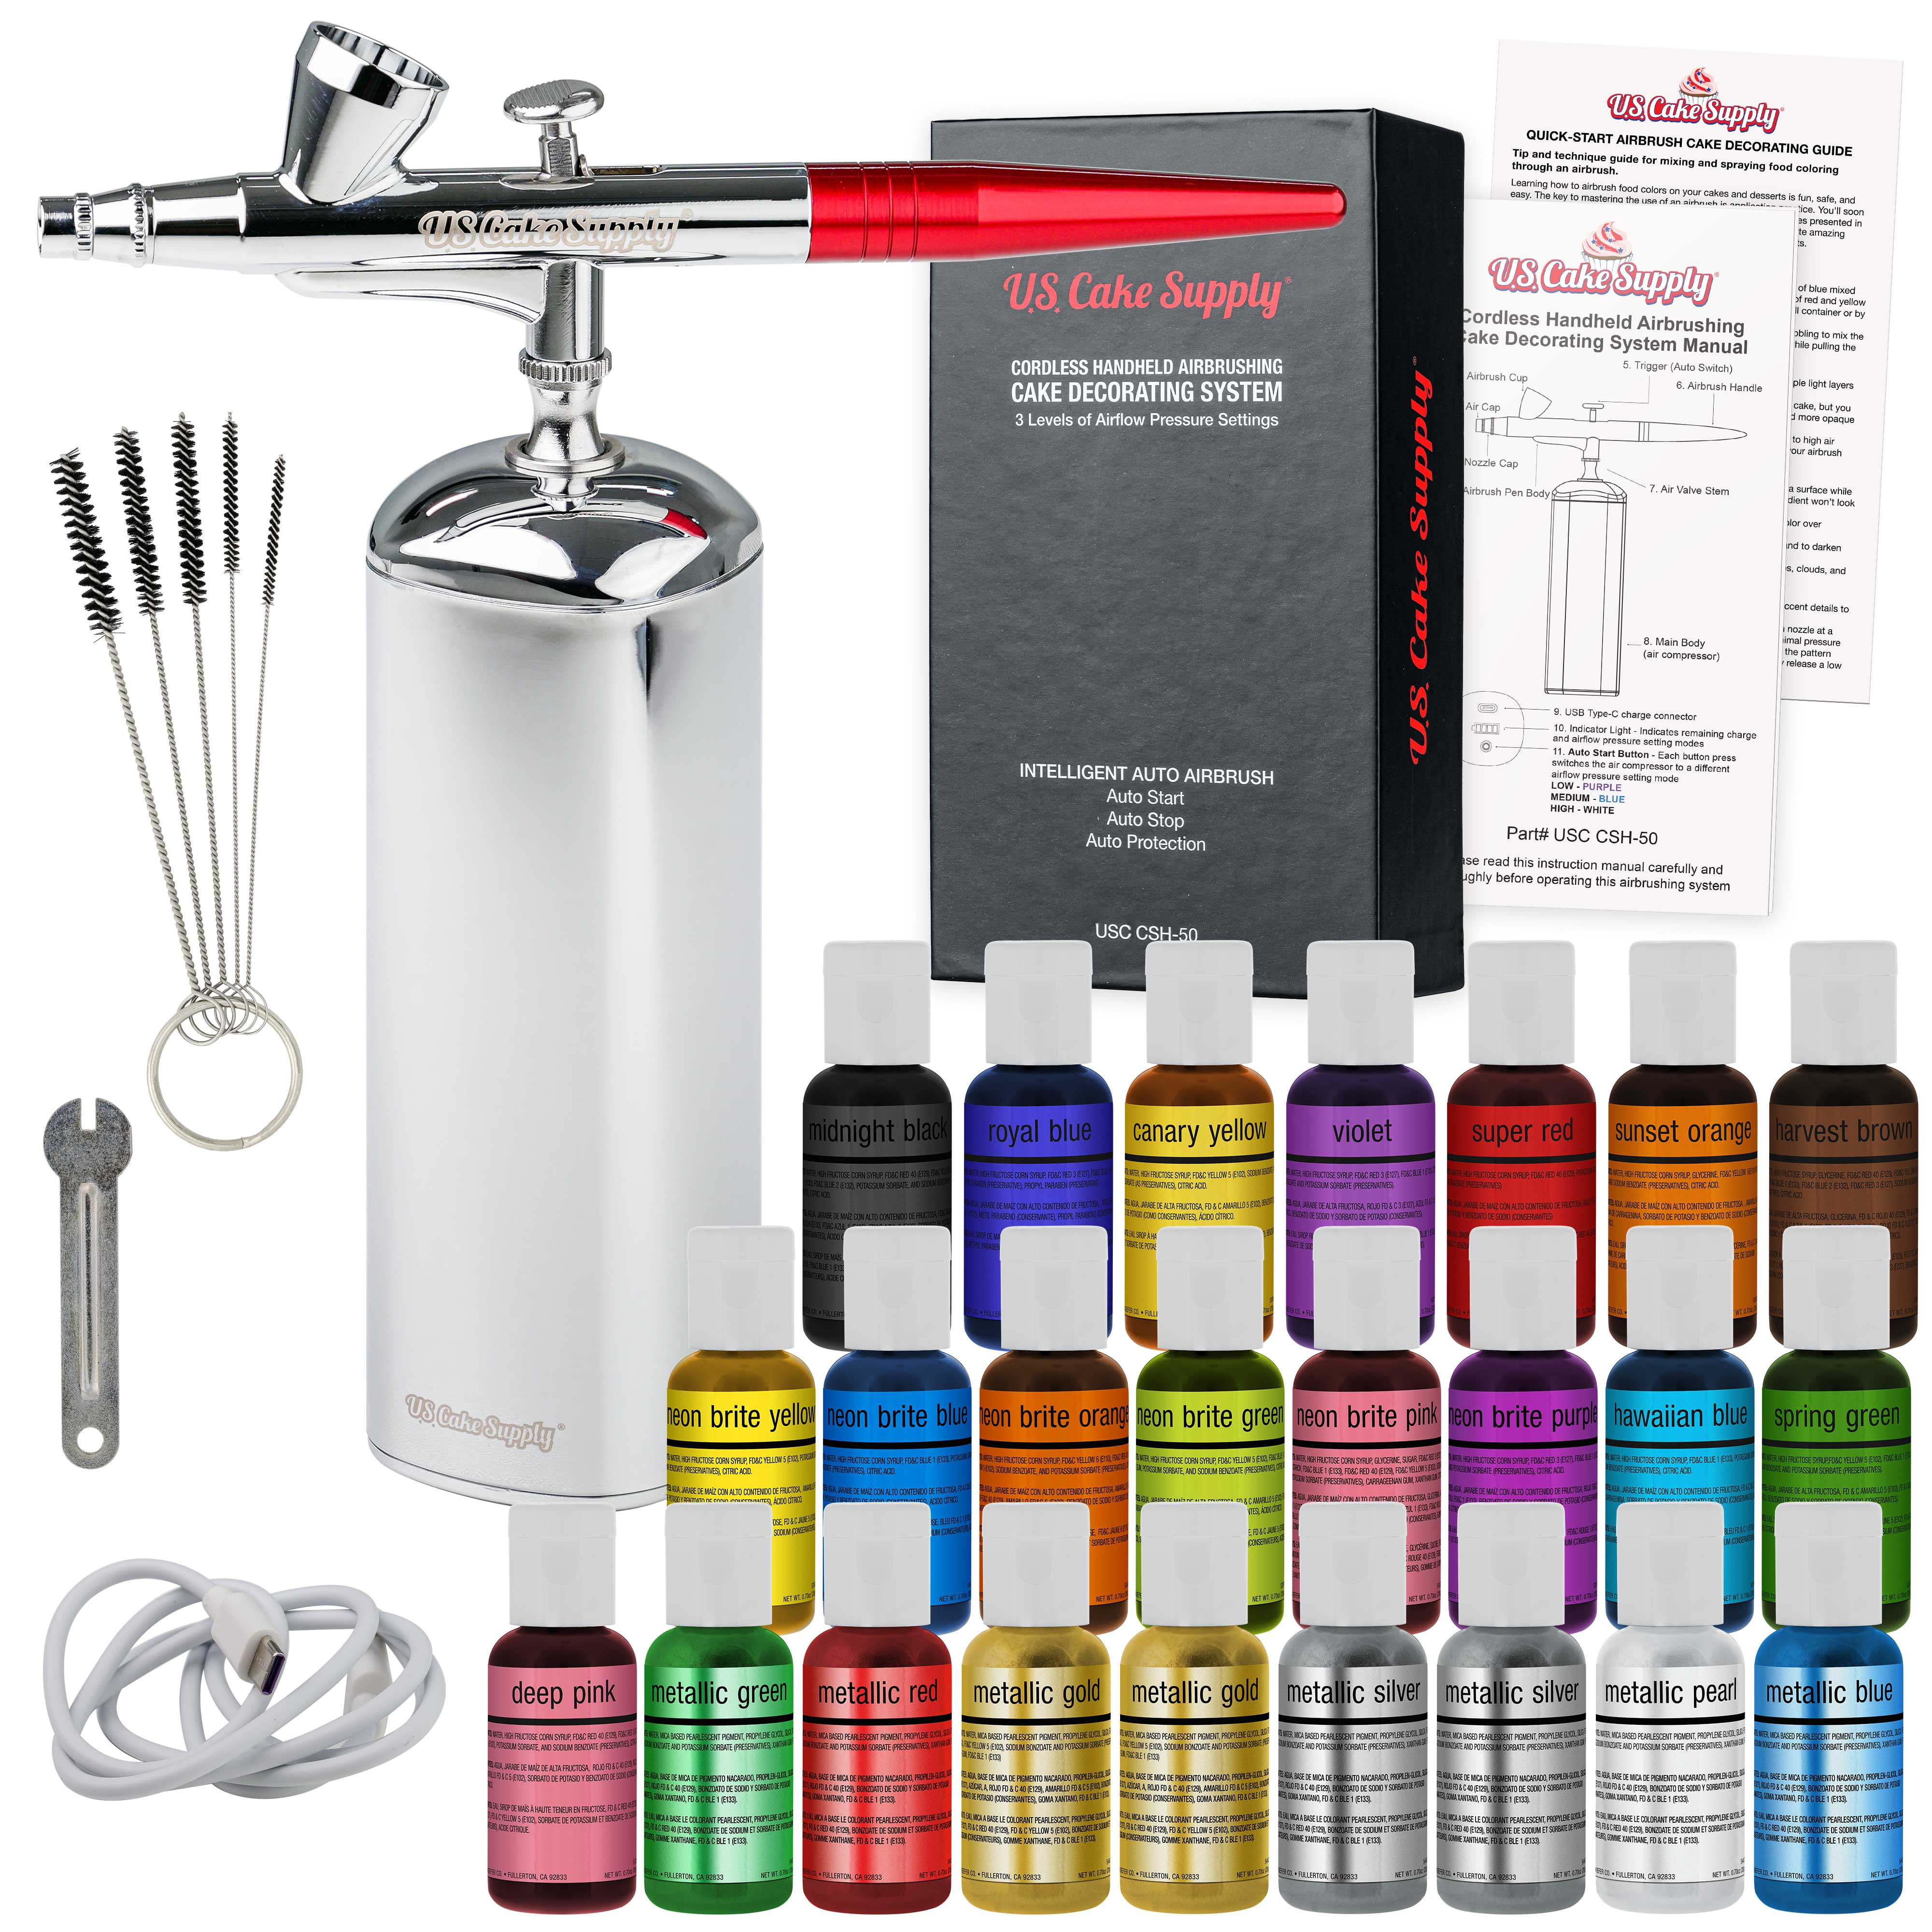 U.S. Cake Supply - Complete Cordless Handheld Airbrush Cake Decorating  System, Professional Kit with a Full Selection of 24 Vivid Airbrush Food  Colors - Decorate Cakes, Cupcakes, Cookies & Desserts 